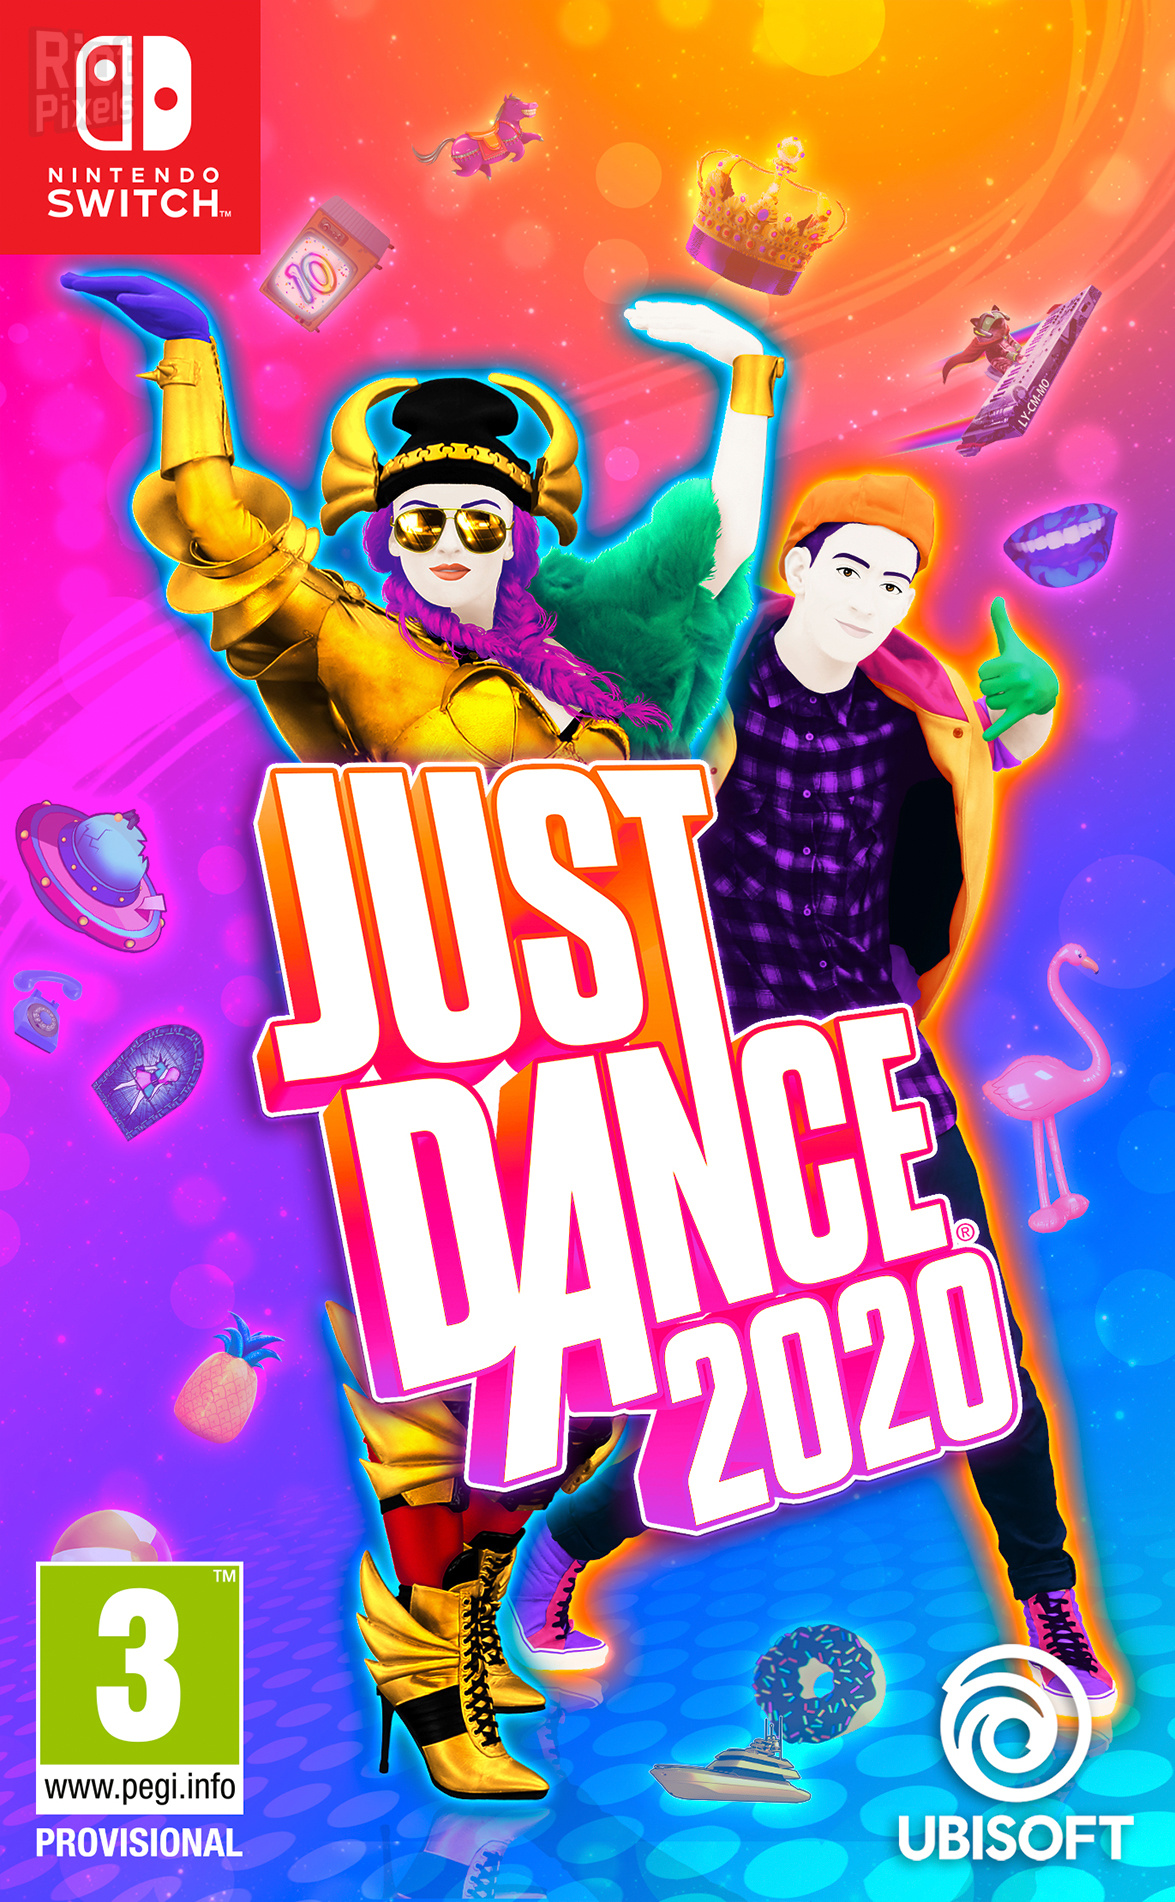 Just Dance Game Covers At Riot Pixels Image